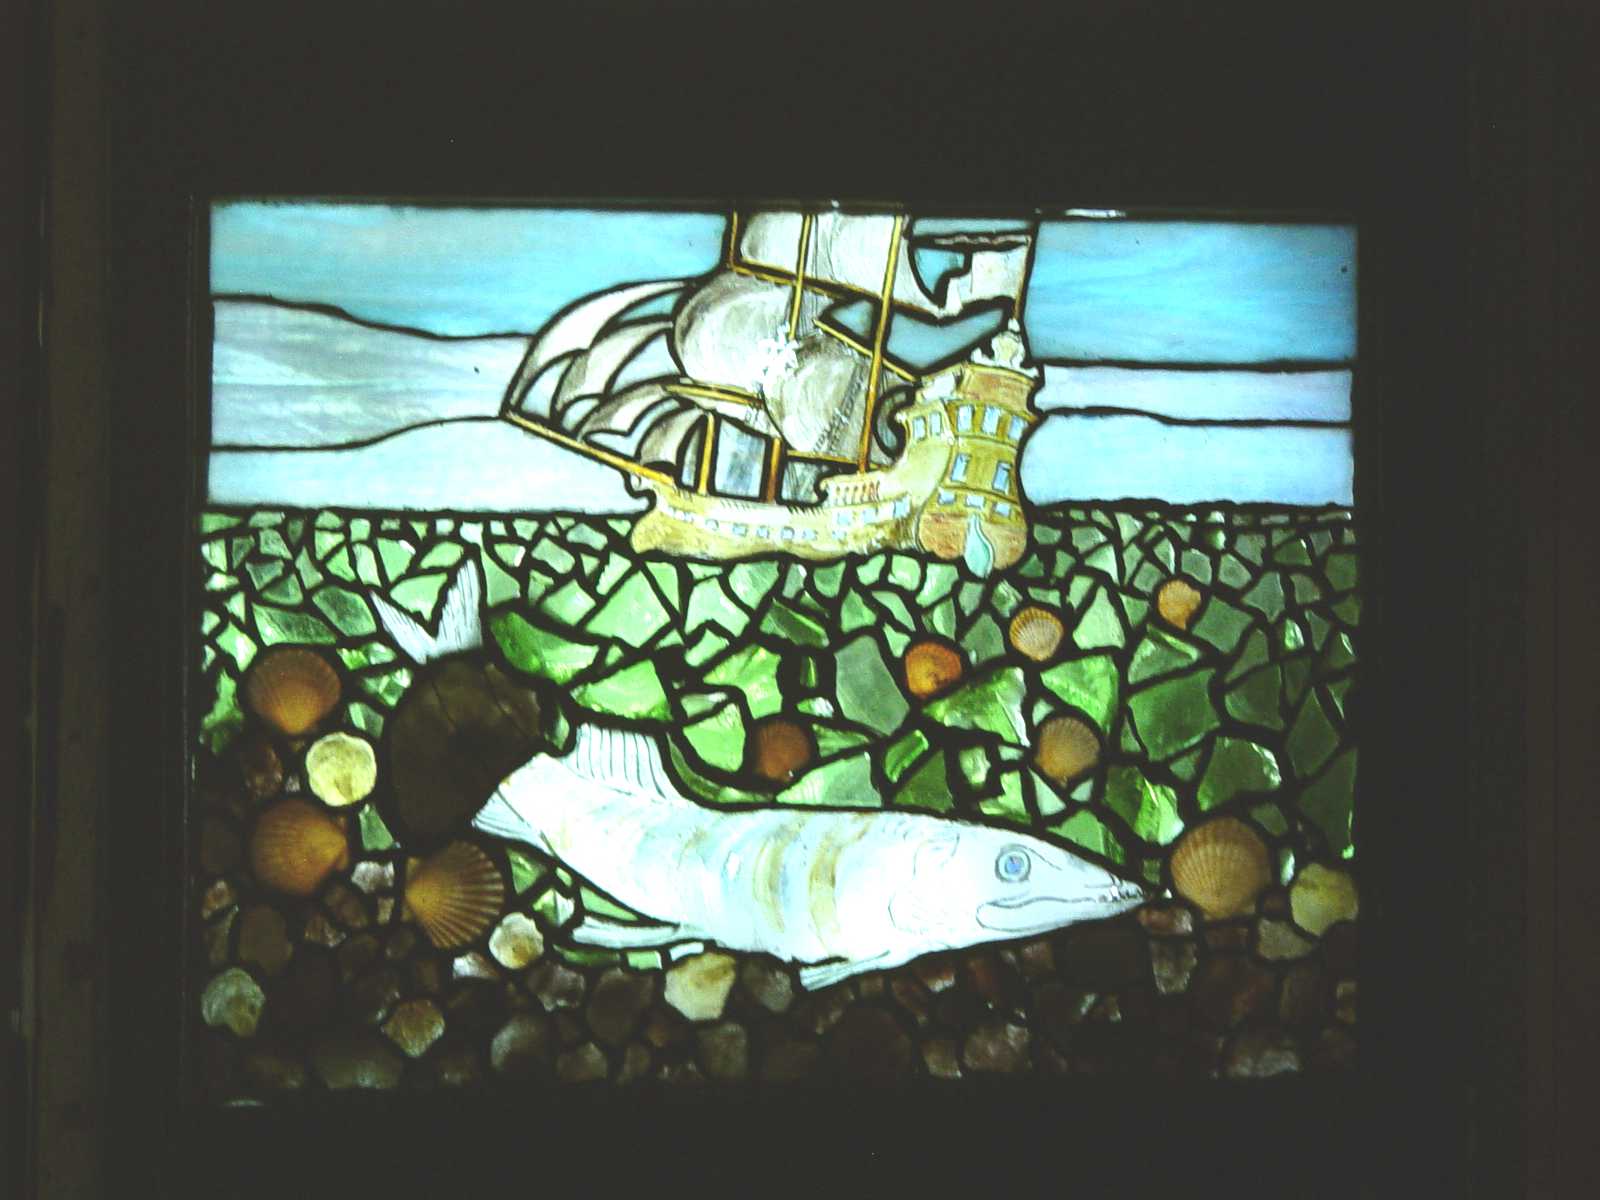 Stained glass from his boat 'Aunt Polly'